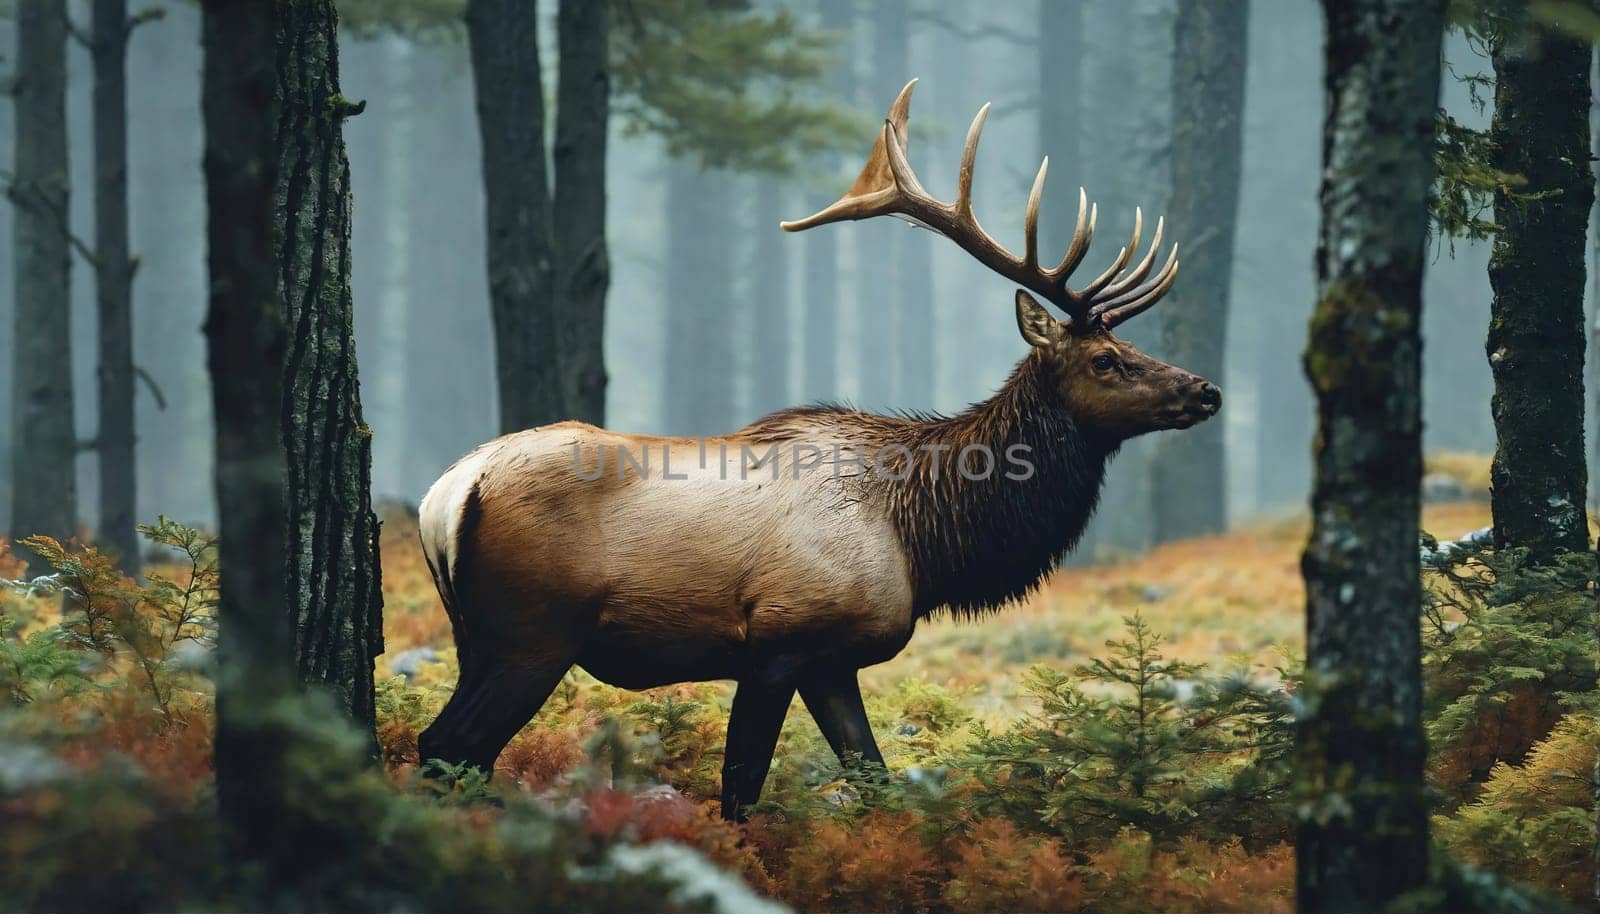 A deer with big antlers wanders in the forest by gordiza